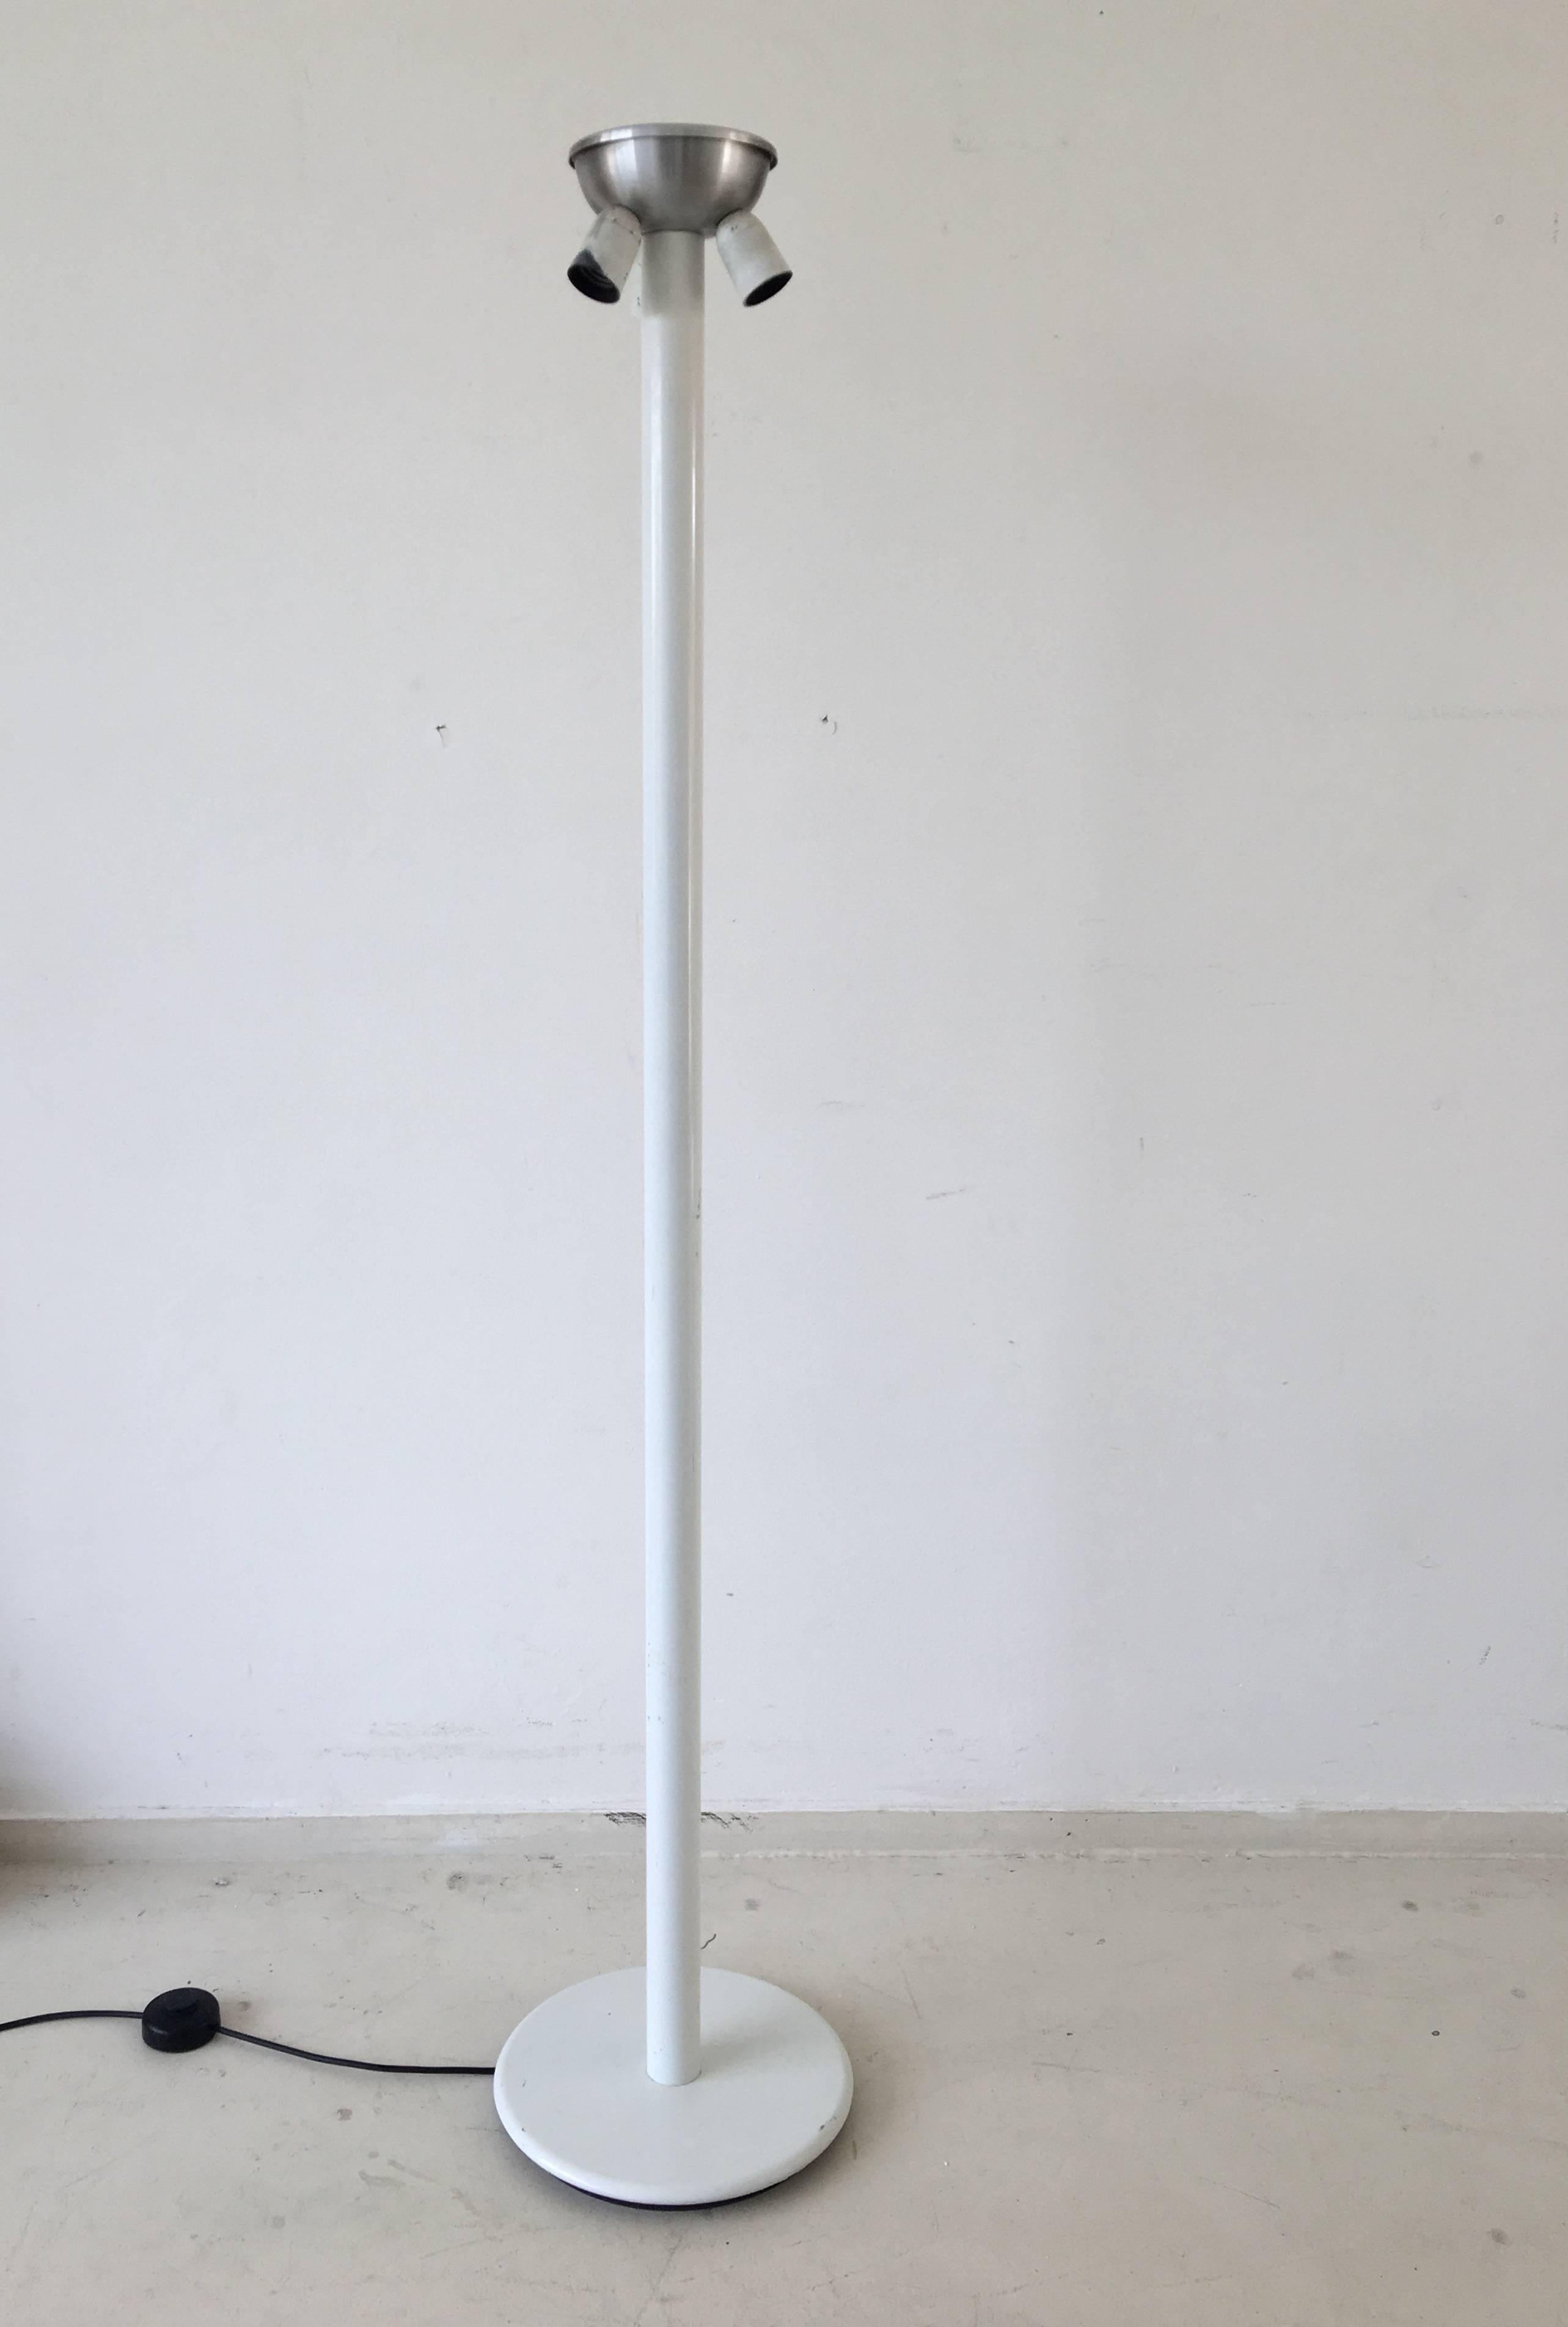 This bright Minimalist floor lamp, features a laquered metal base with on top a plastic shade which is demontable for cleaning. Some signs of age and use. The lamp was designed and manufactured in Europe. Unknown designer/manufacturer. European